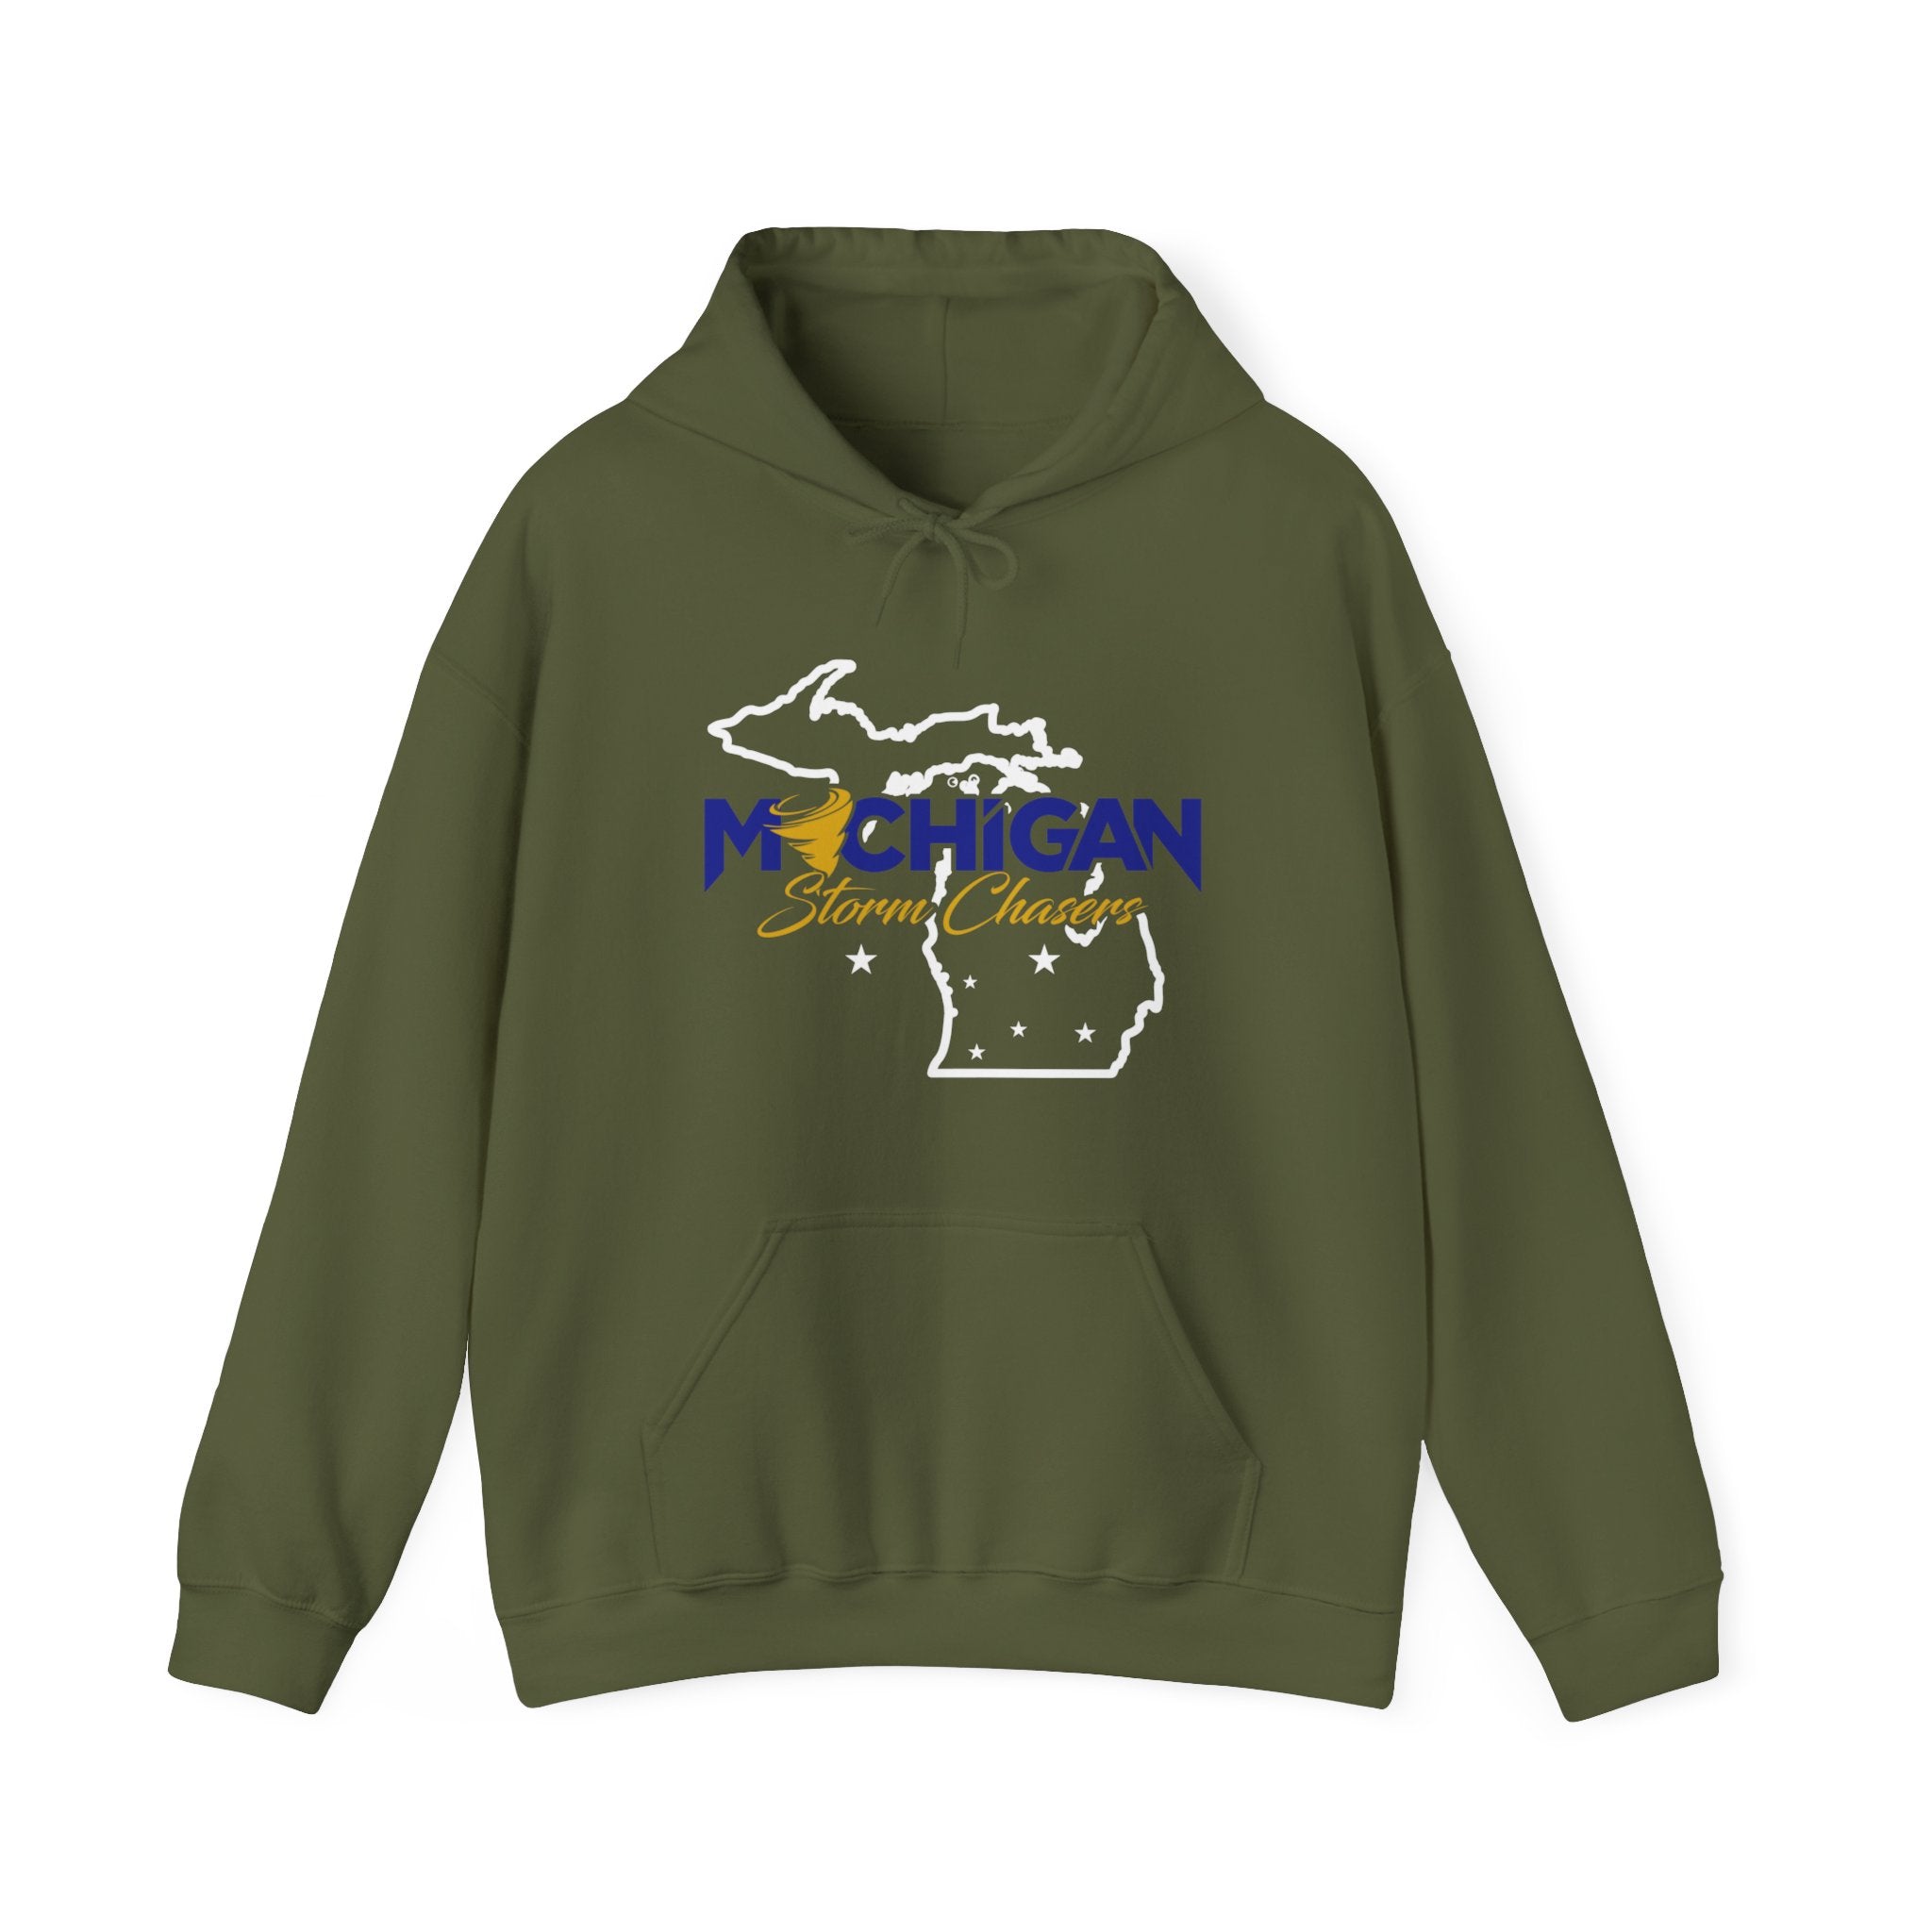 Michigan Storm Chasers Hoodie 